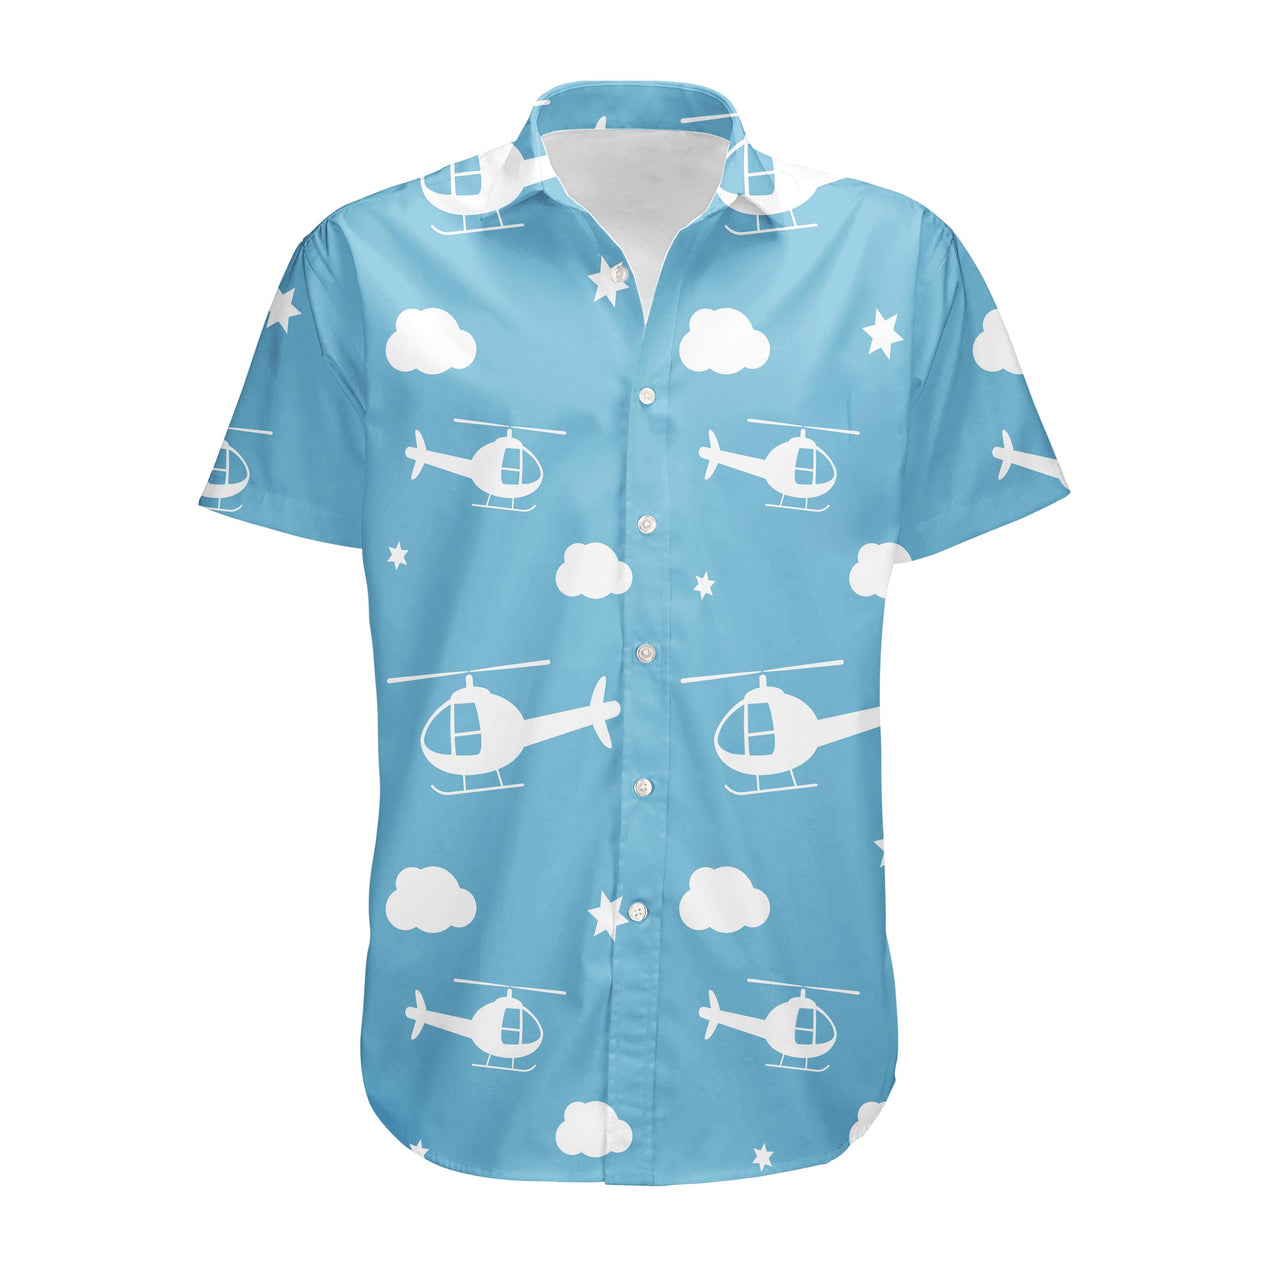 Helicopters & Clouds Designed 3D Shirts